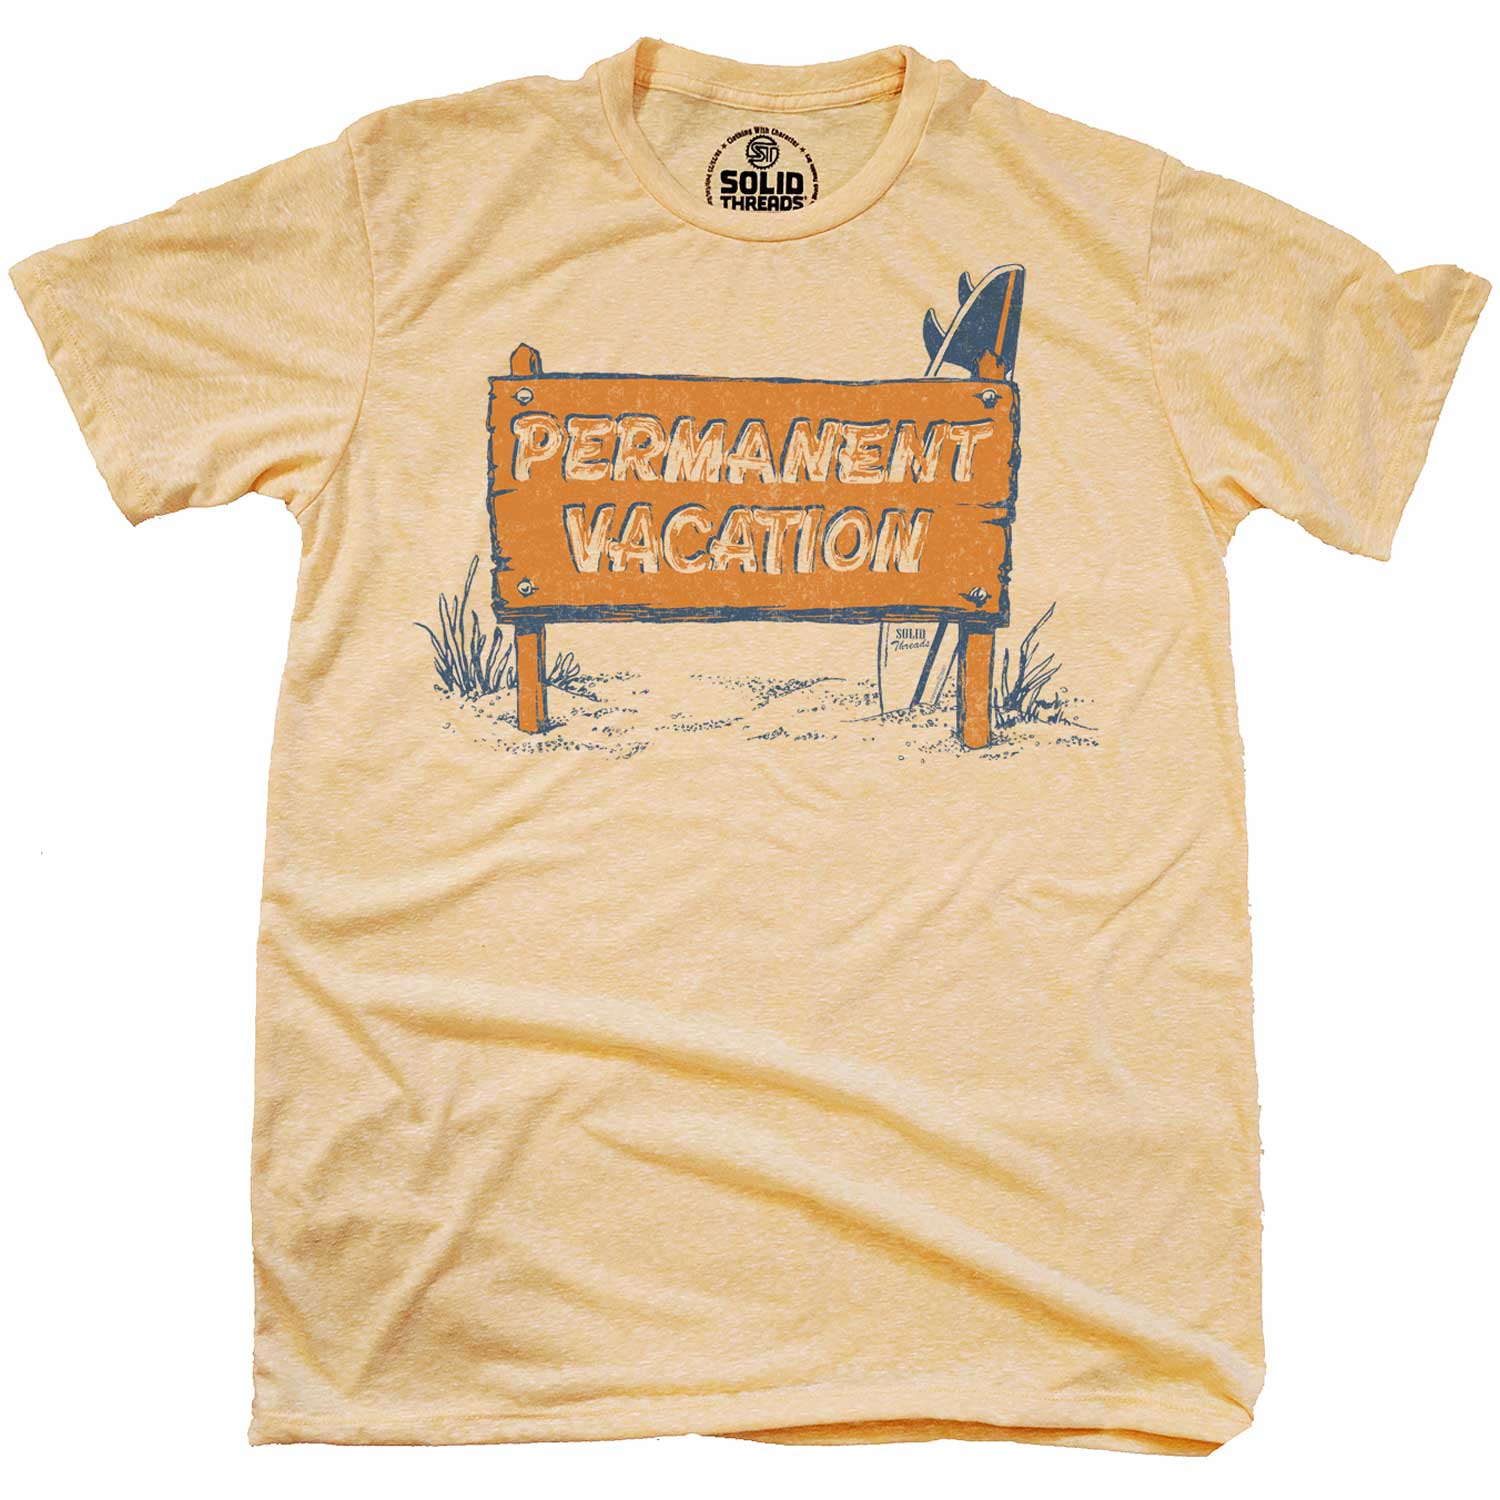 Men's Permanent Vacation Vintage Graphic T-Shirt | Funny Beach Tee | Solid Threads